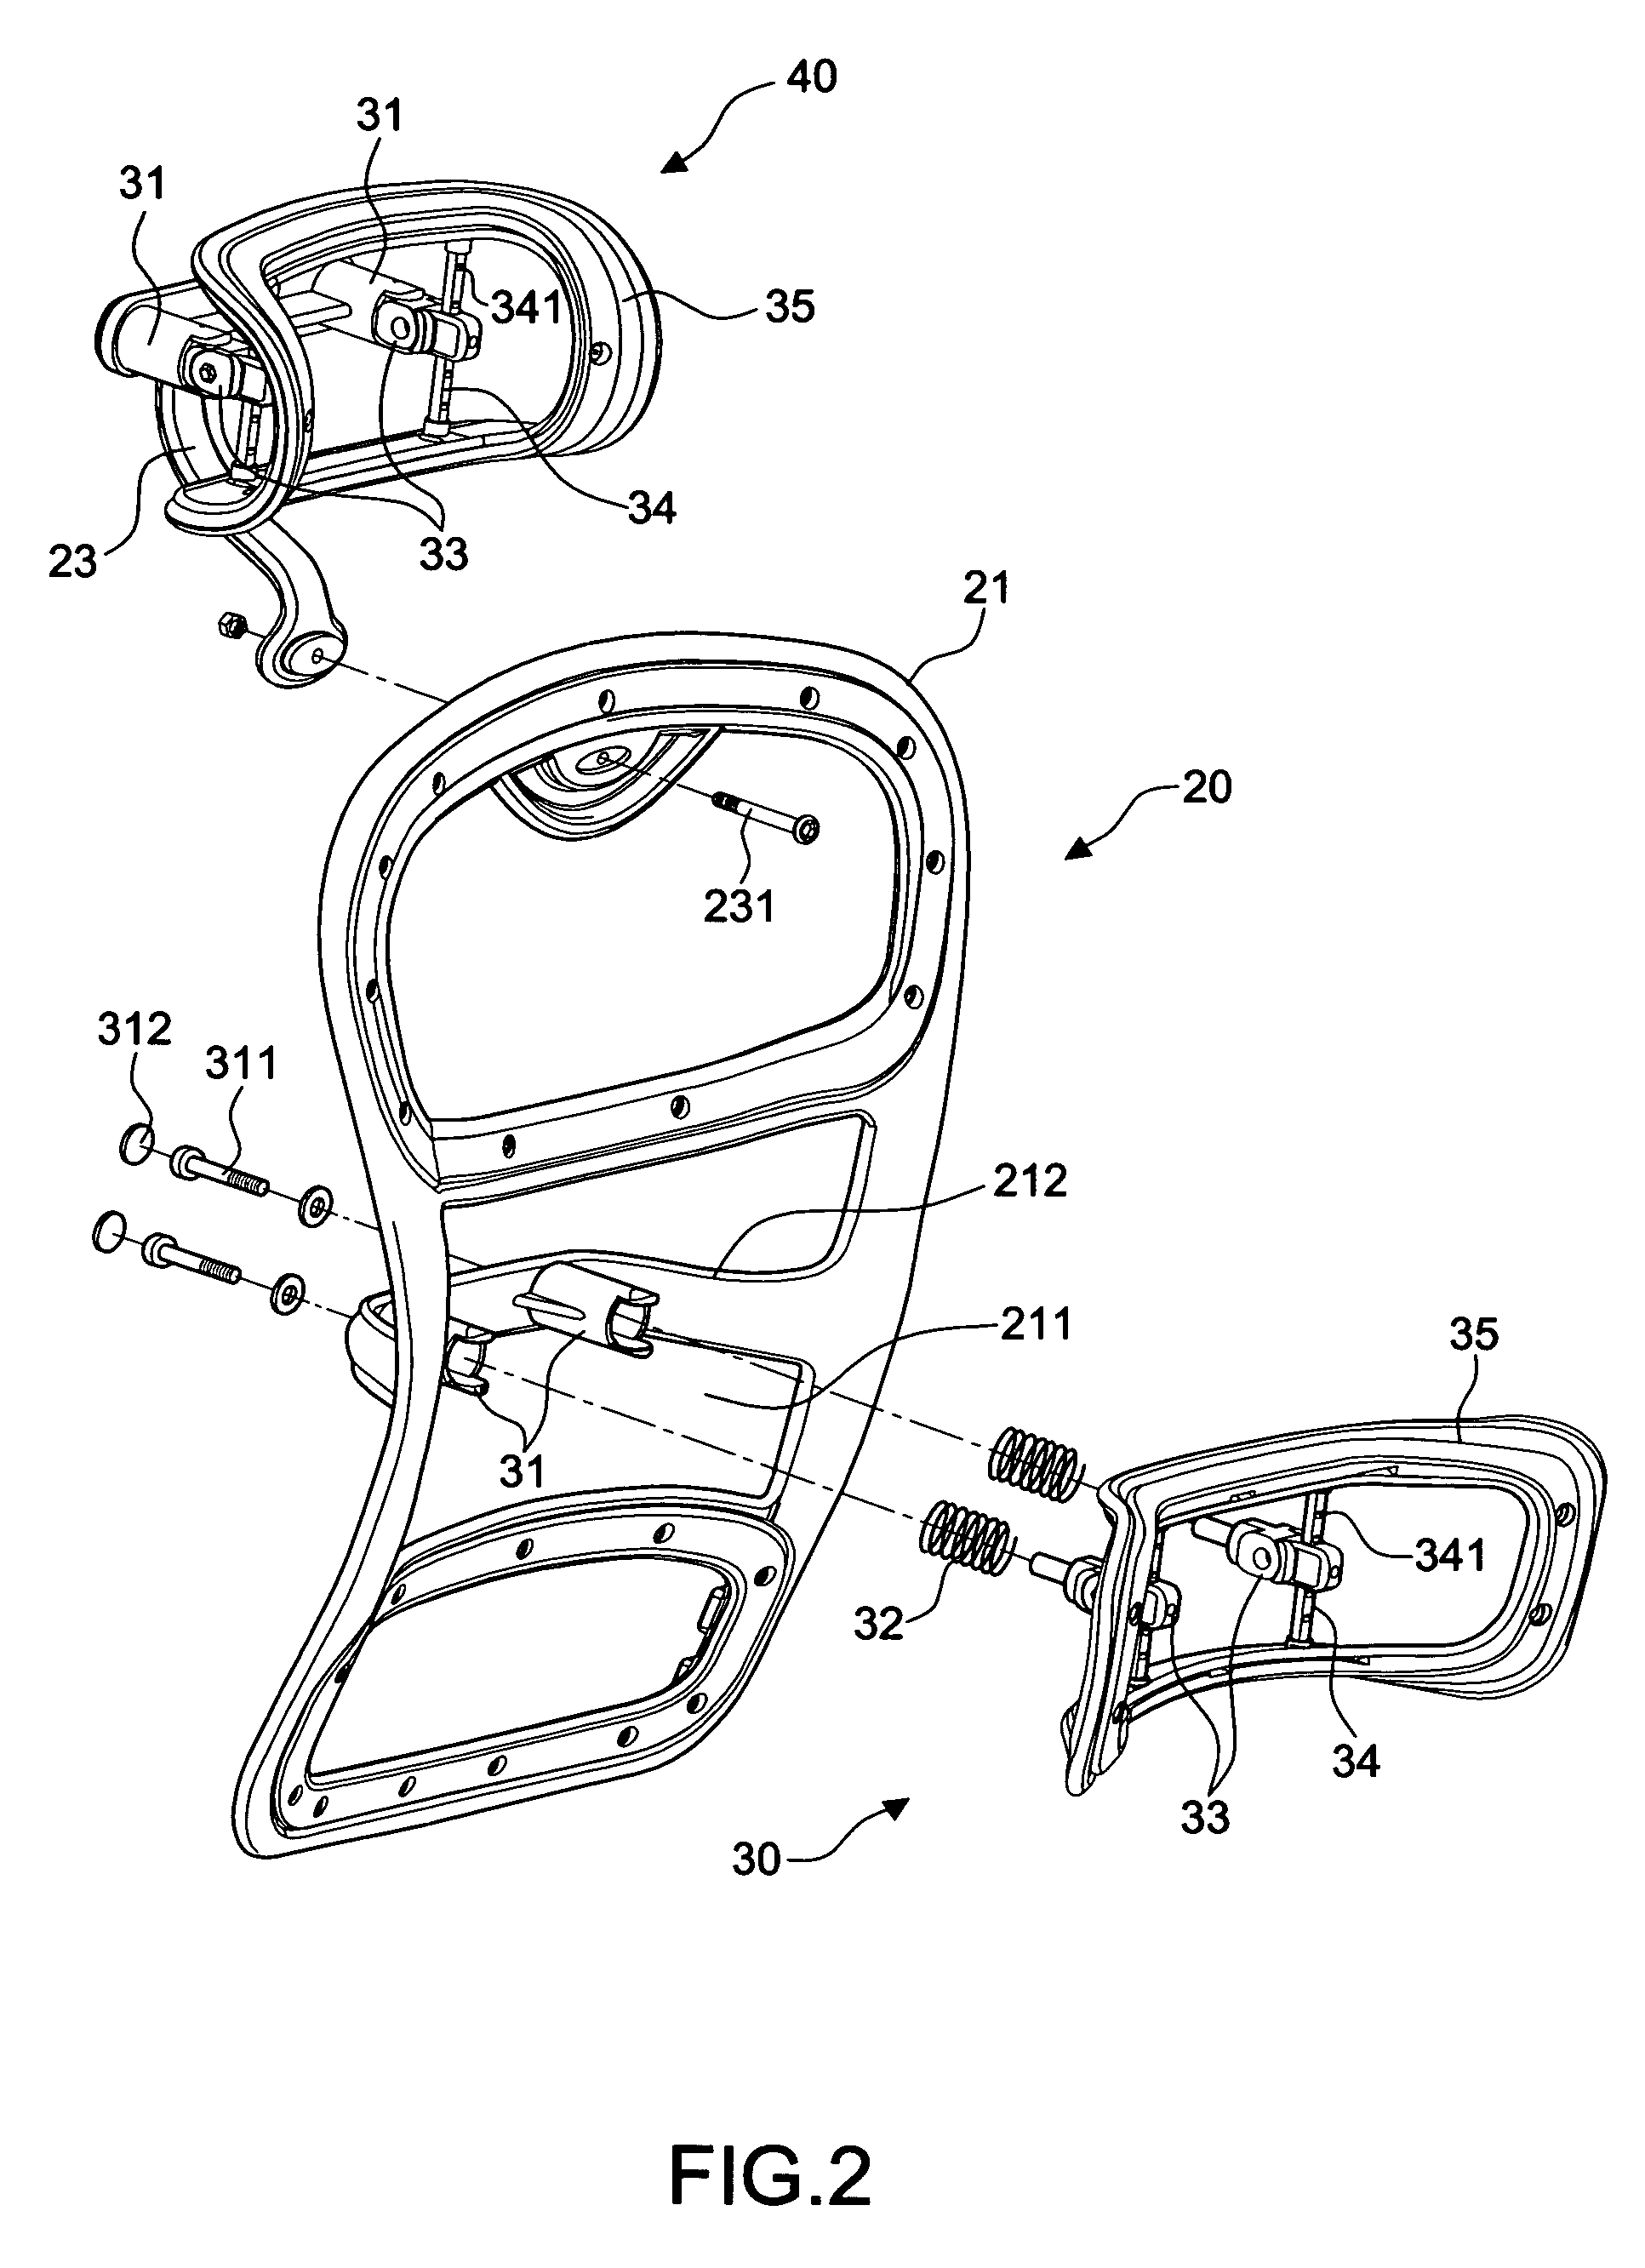 Backrest adjusting device for office chairs